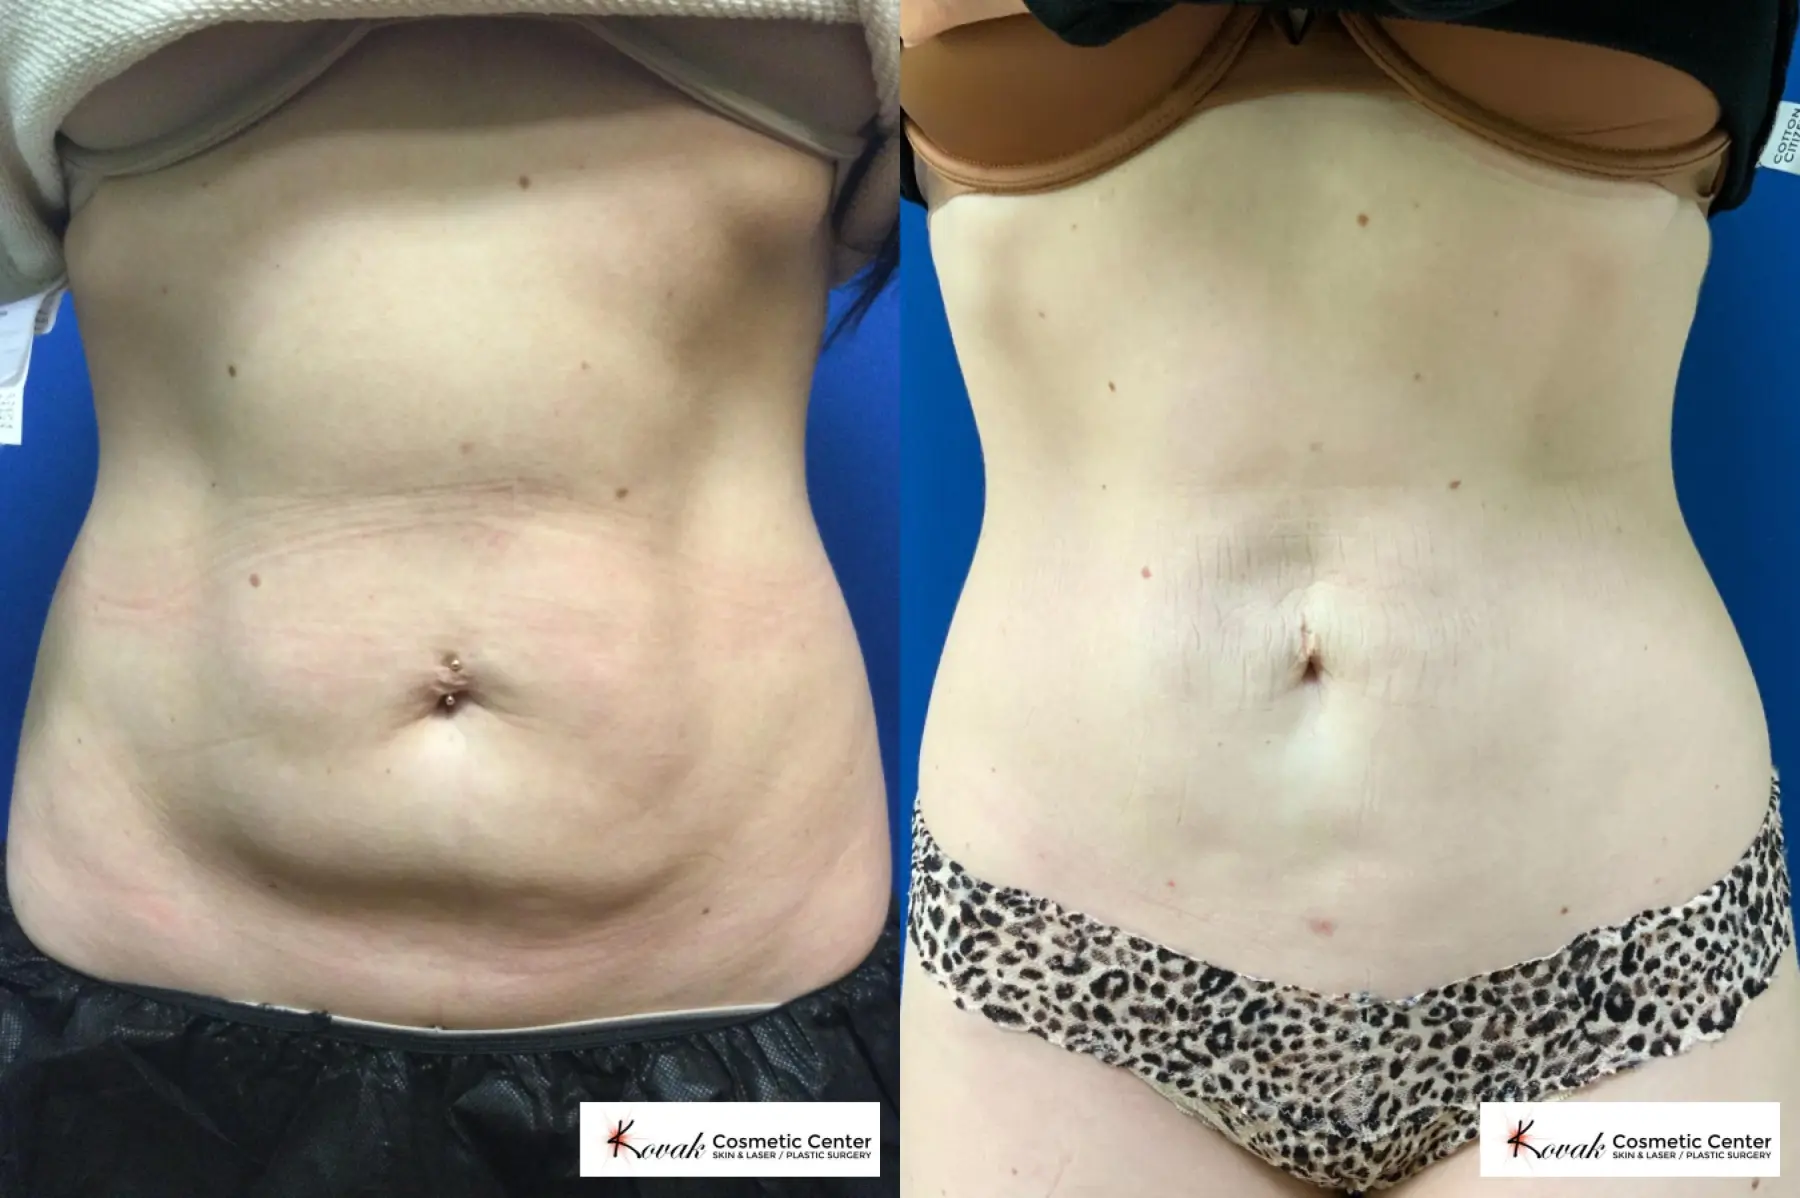  Vaser Liposuction with 8 Emsculpt Neo Treatments on a 28 year old woman - Before and After  